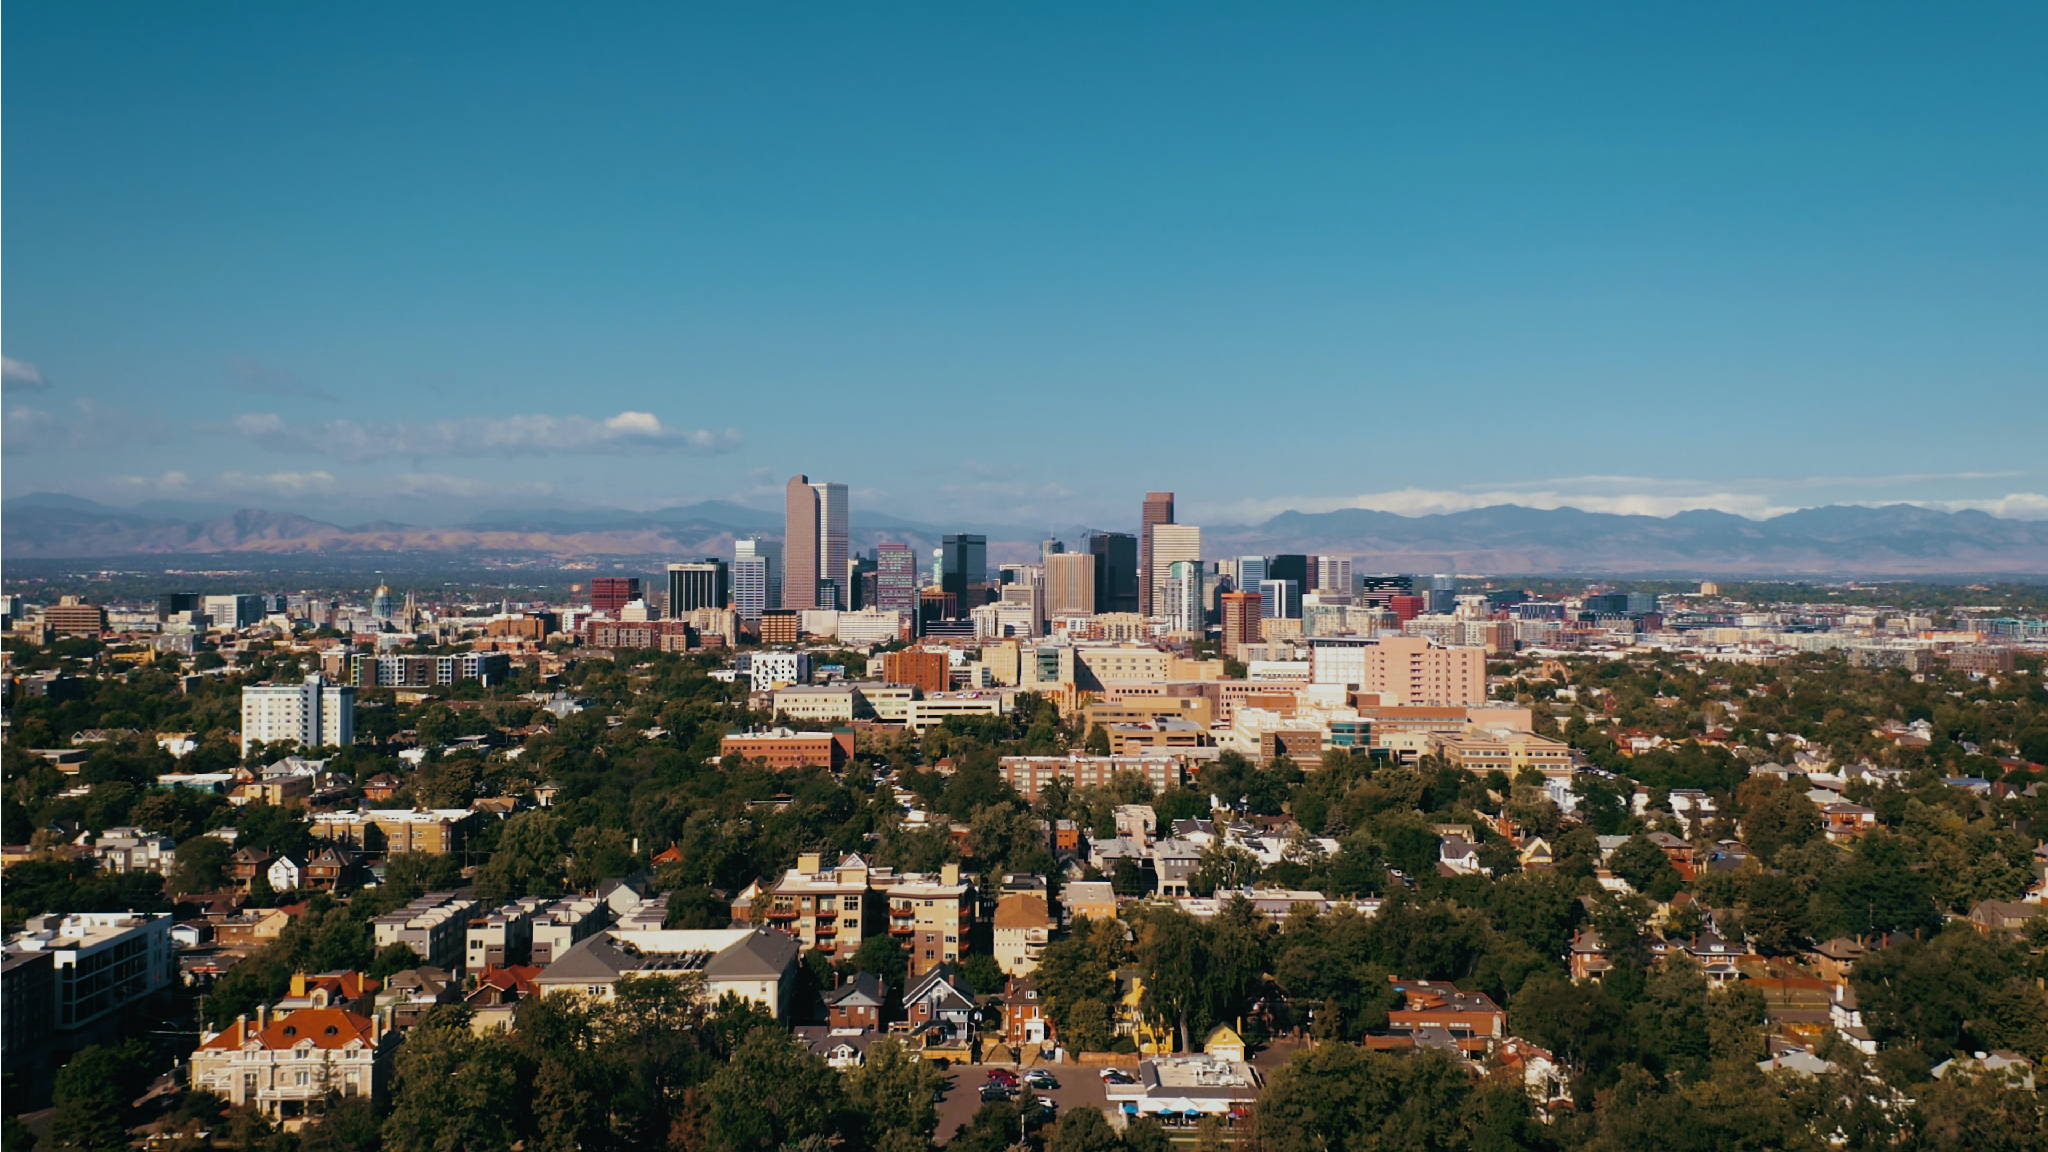 Downtown Denver skyline on a clear summer day with the Colorado Rocky Mountains in the distance.